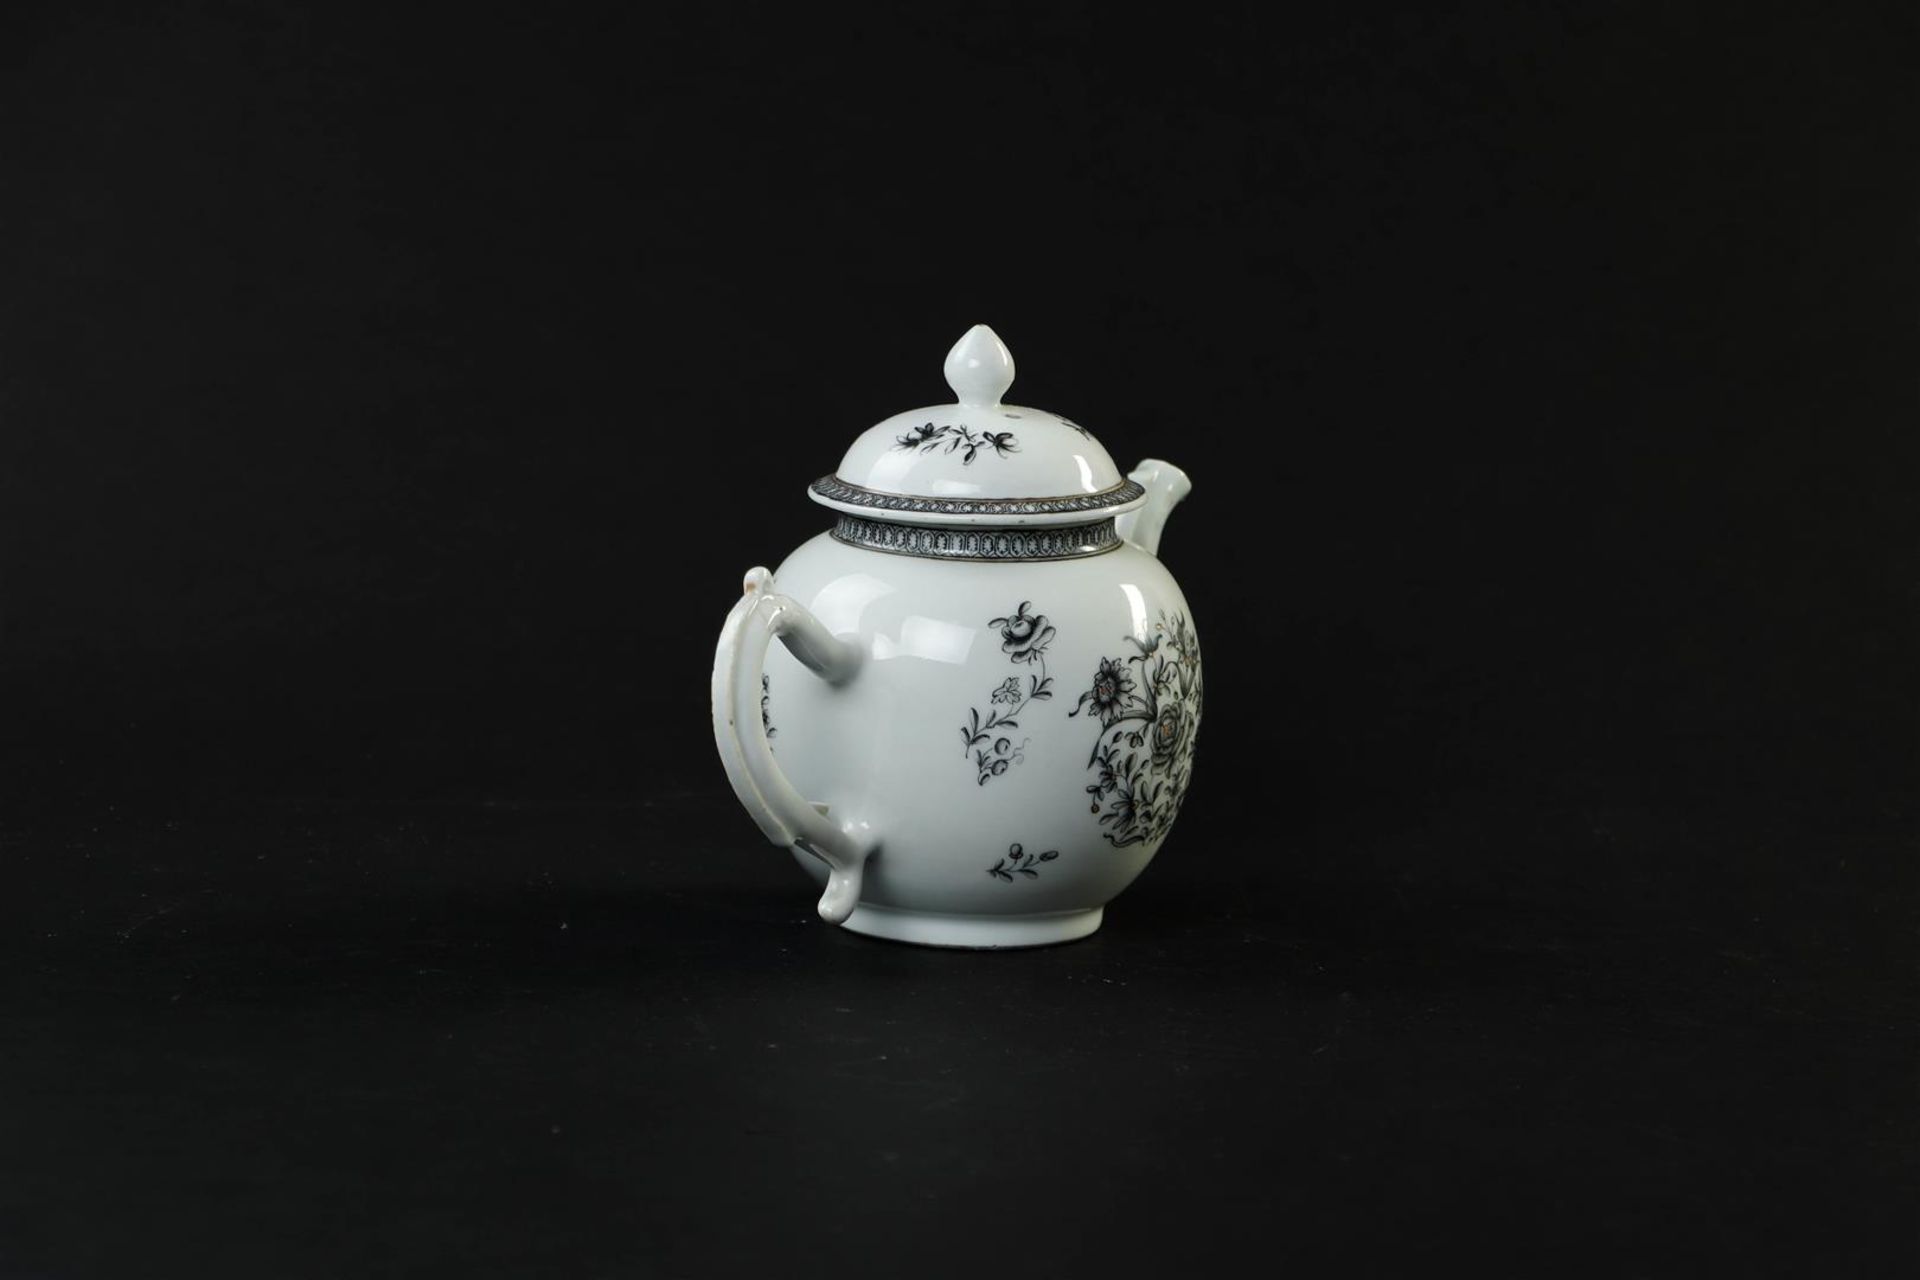 An Encre de Chine tableware set consisting of a teapot, milk jug, tea caddy, patty pan and spoon tra - Image 4 of 24